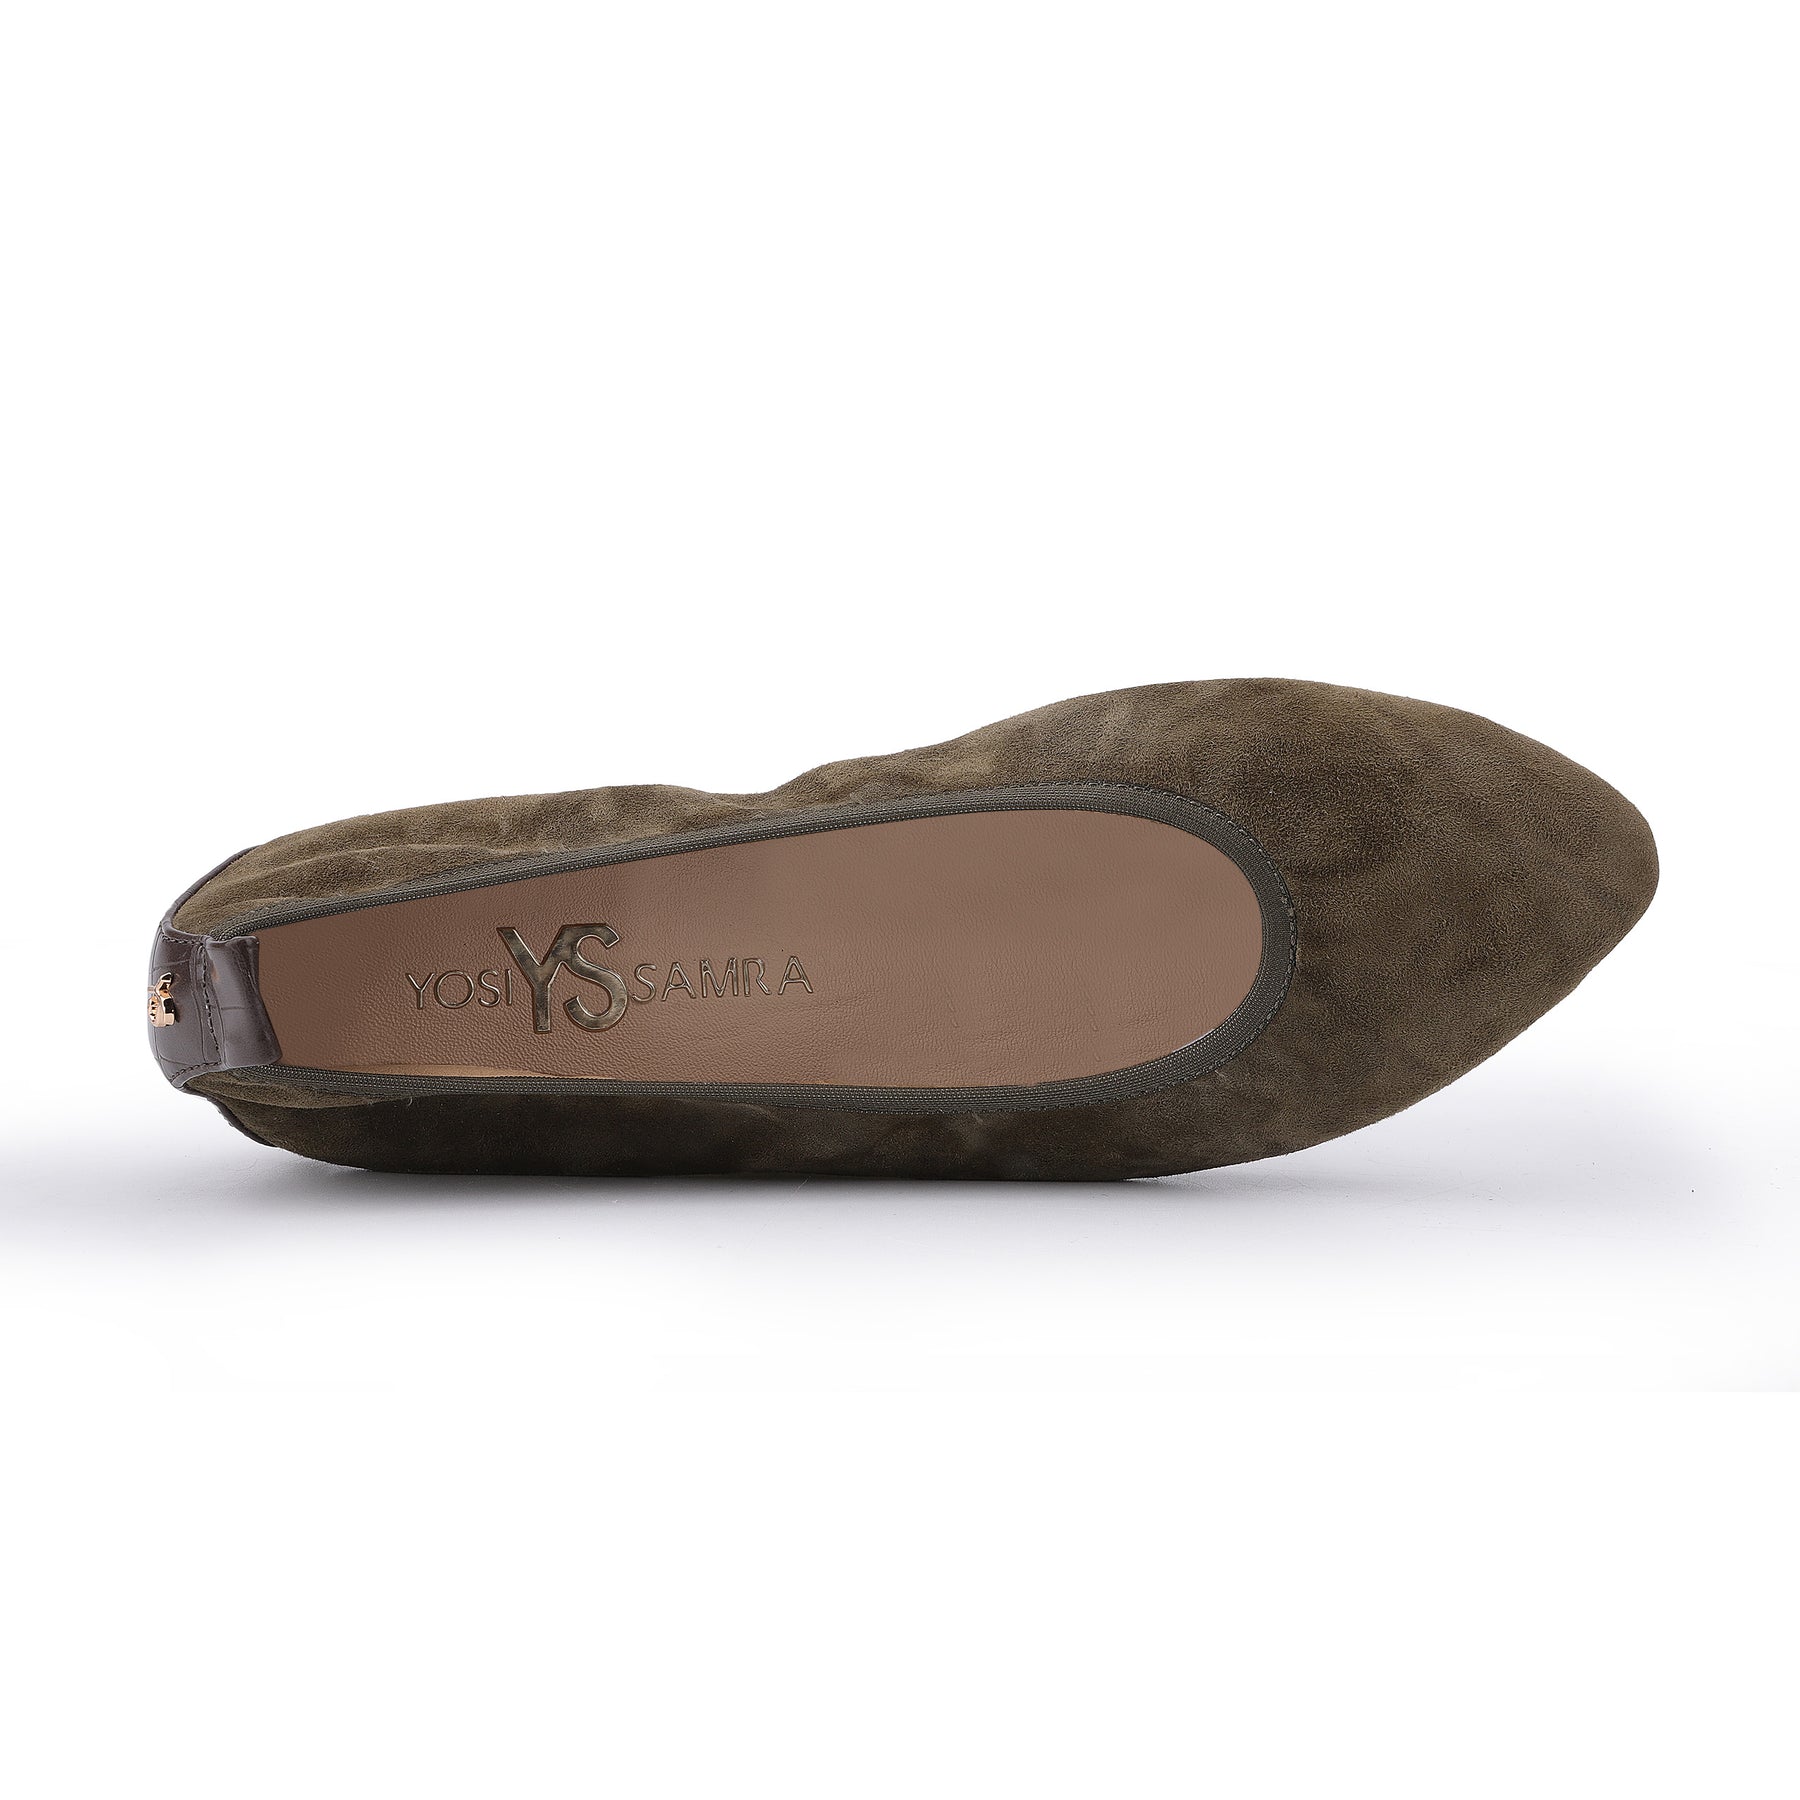 Vienna Pointed Toe Foldable Ballet Flat in Mud Suede